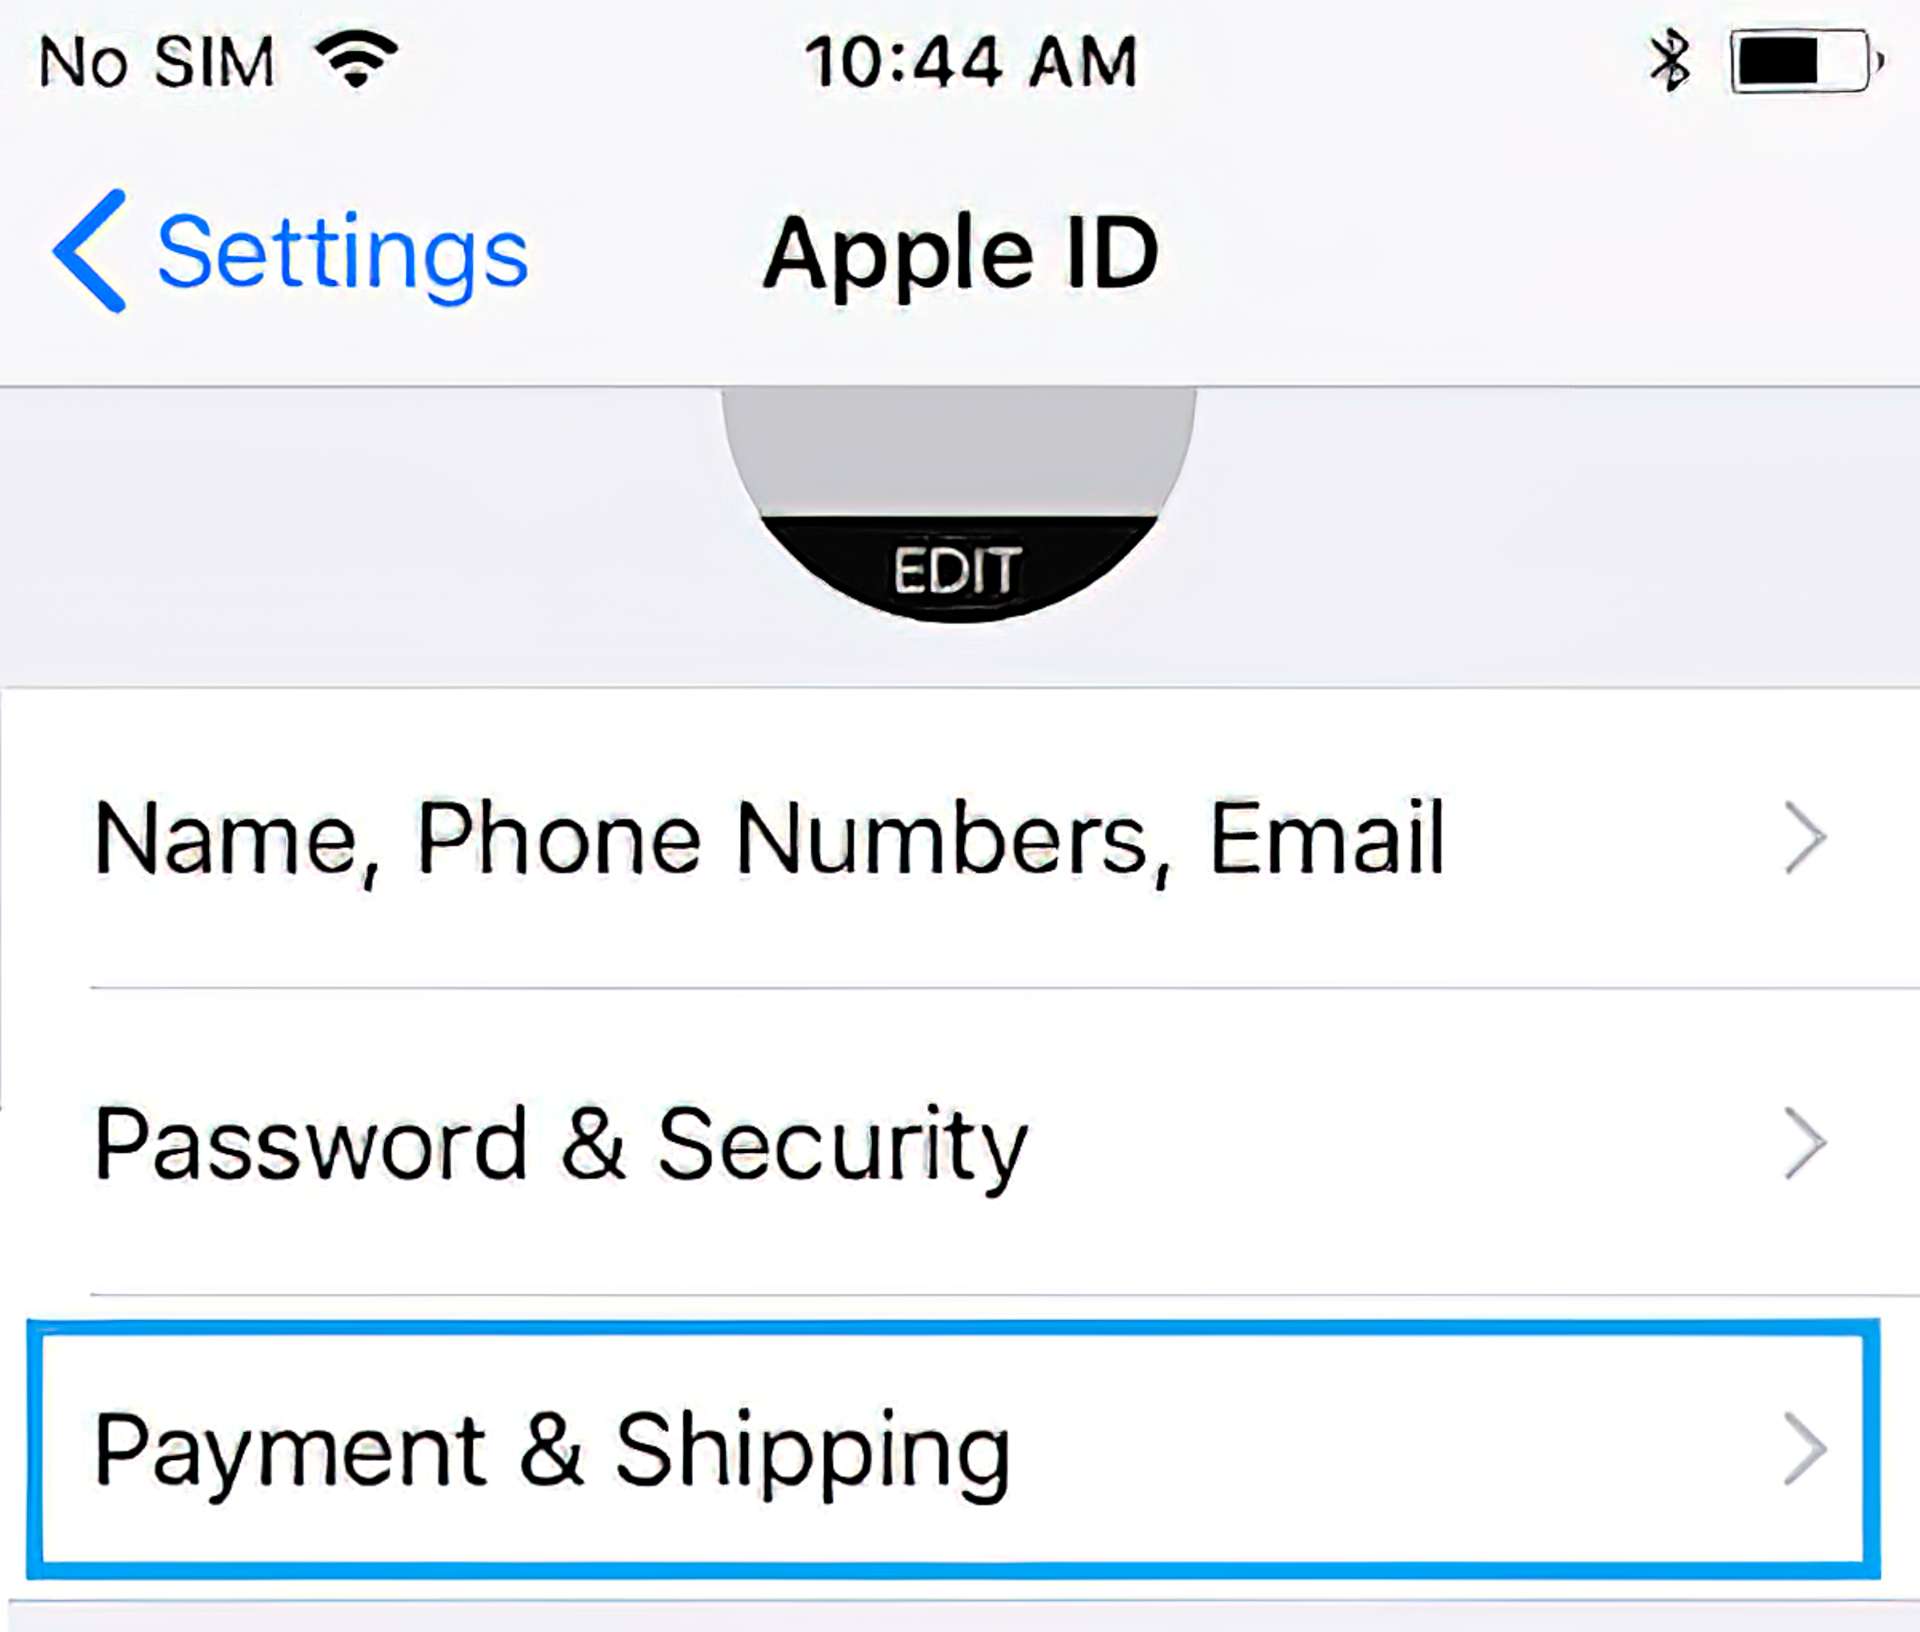 You will find below the steps to remove payment info on iPhone, iPad, Mac, Windows as well as other devices like Apple TV and Google Chromebook.